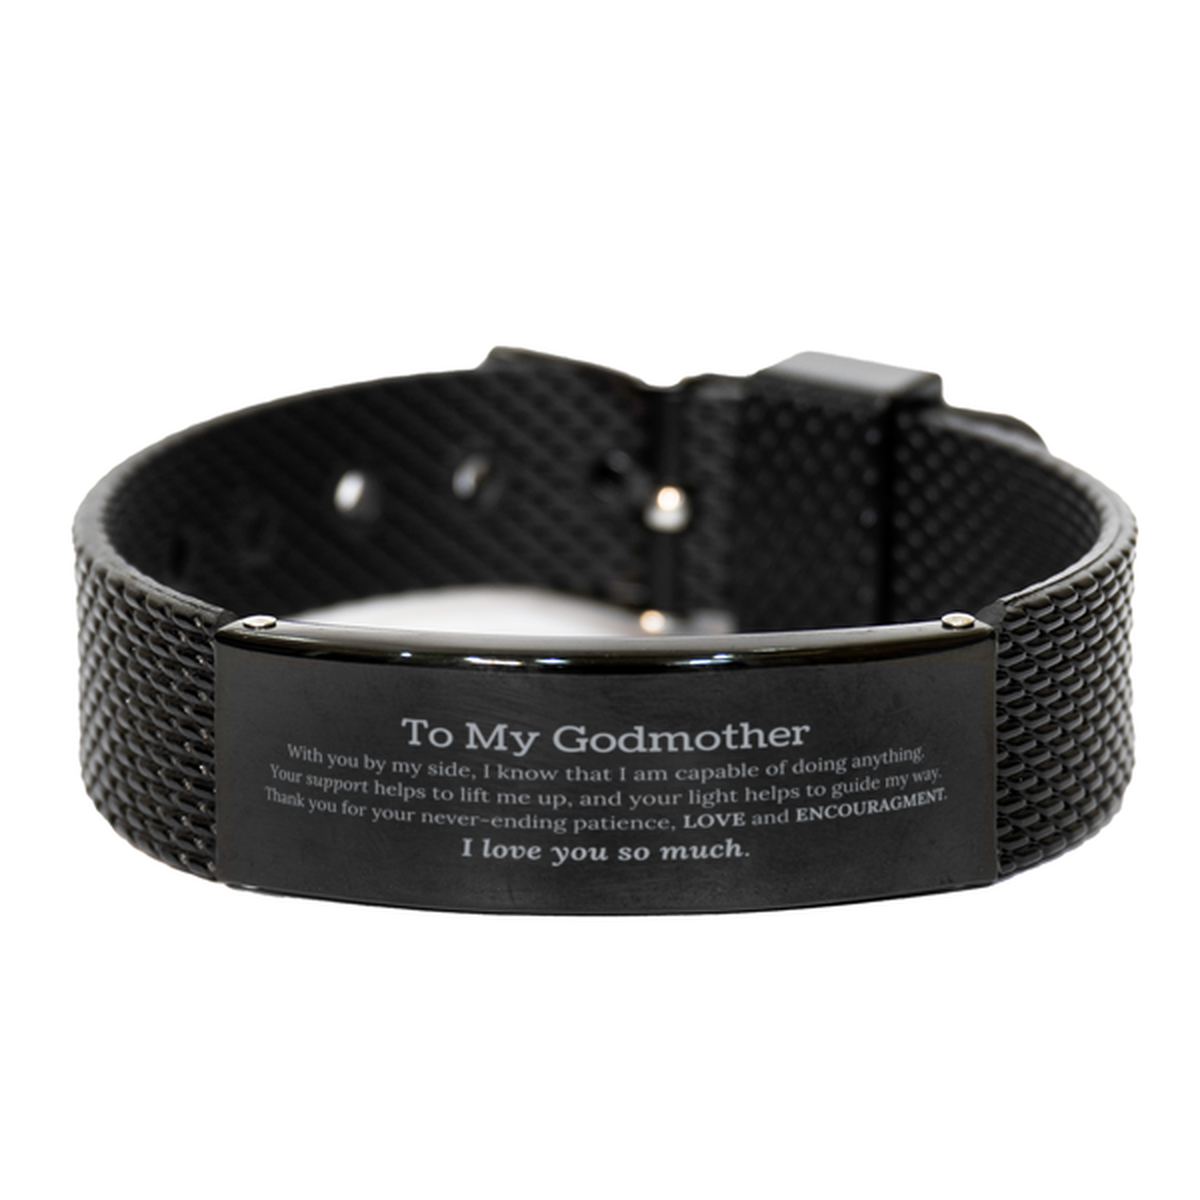 Appreciation Godmother Black Shark Mesh Bracelet Gifts, To My Godmother Birthday Christmas Wedding Keepsake Gifts for Godmother With you by my side, I know that I am capable of doing anything. I love you so much